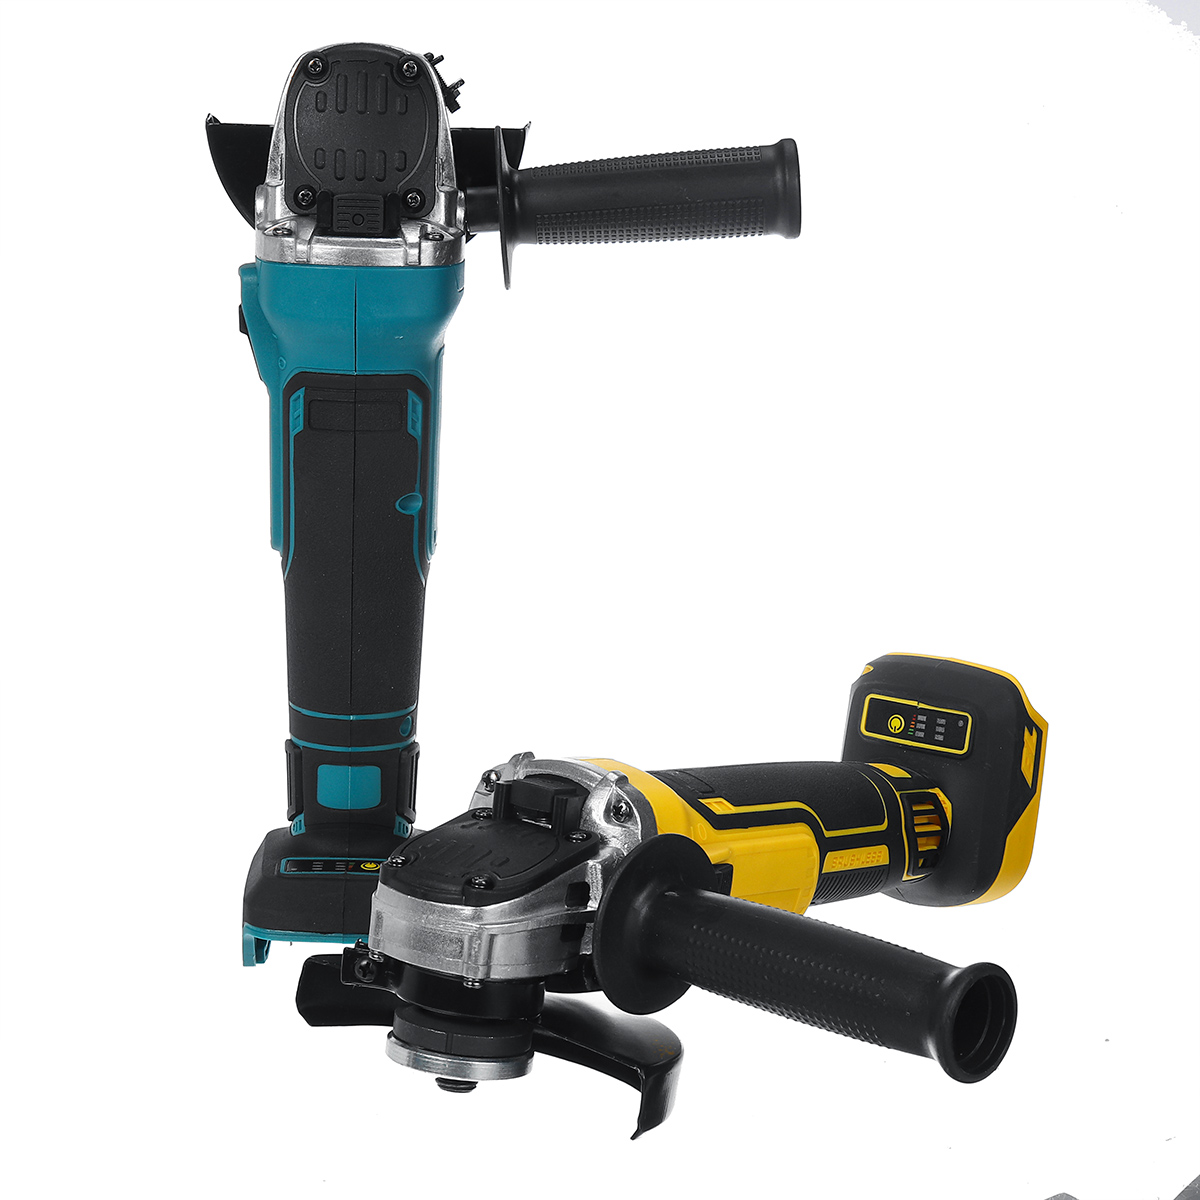 Electric-Brushless-Cordless-Angle-Grinder-M10-125mm-Cut-for-Makita-18V-Battery-1791879-8